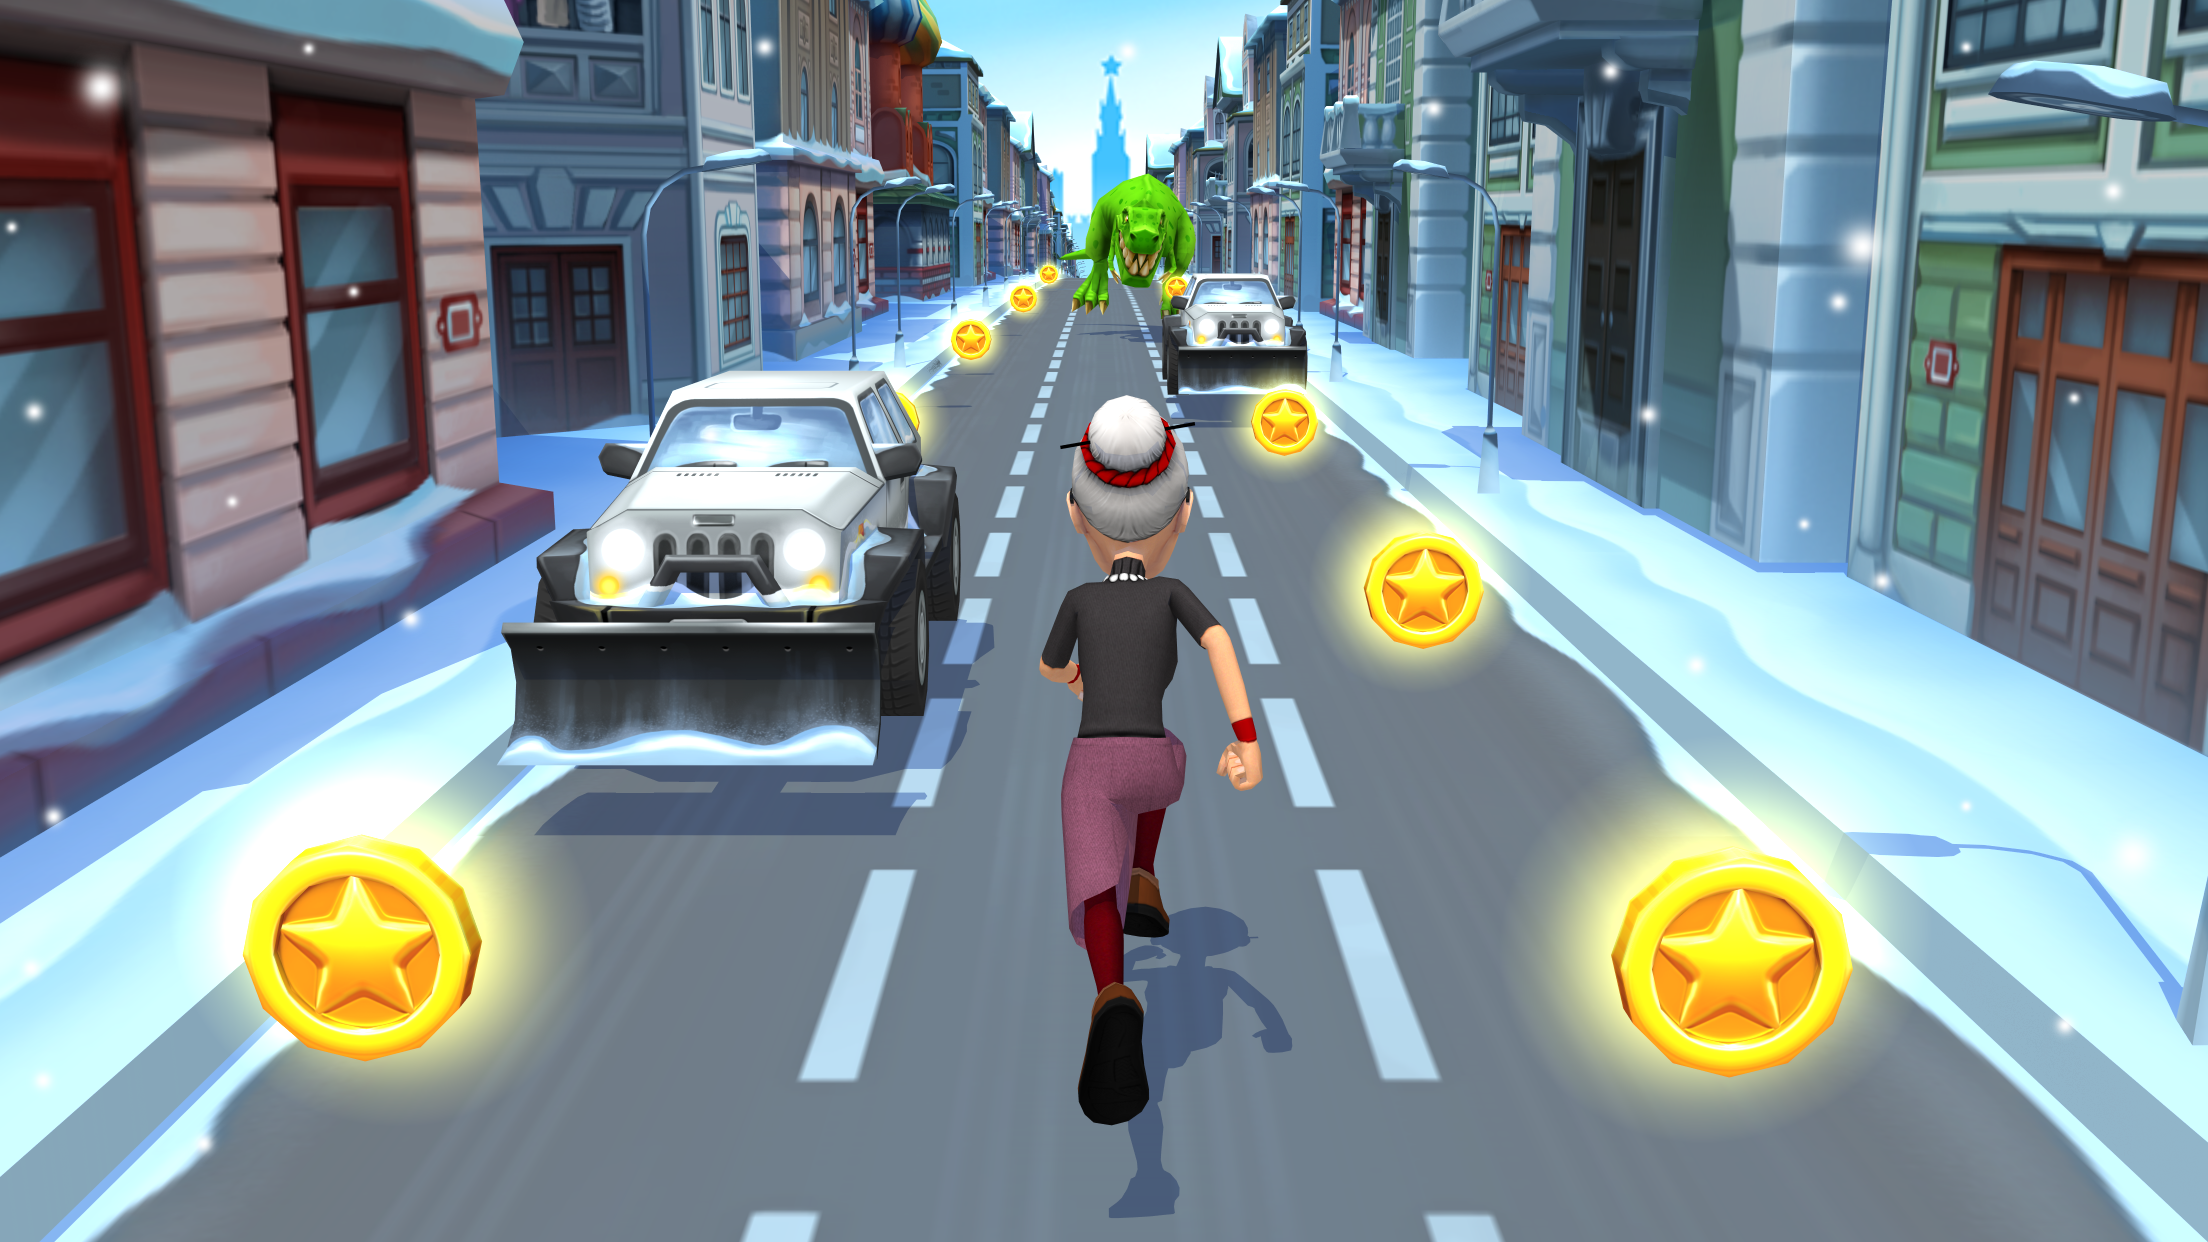 Angry Gran Run - Running Game APK 2.32.0 for Android – Download Angry Gran  Run - Running Game APK Latest Version from APKFab.com